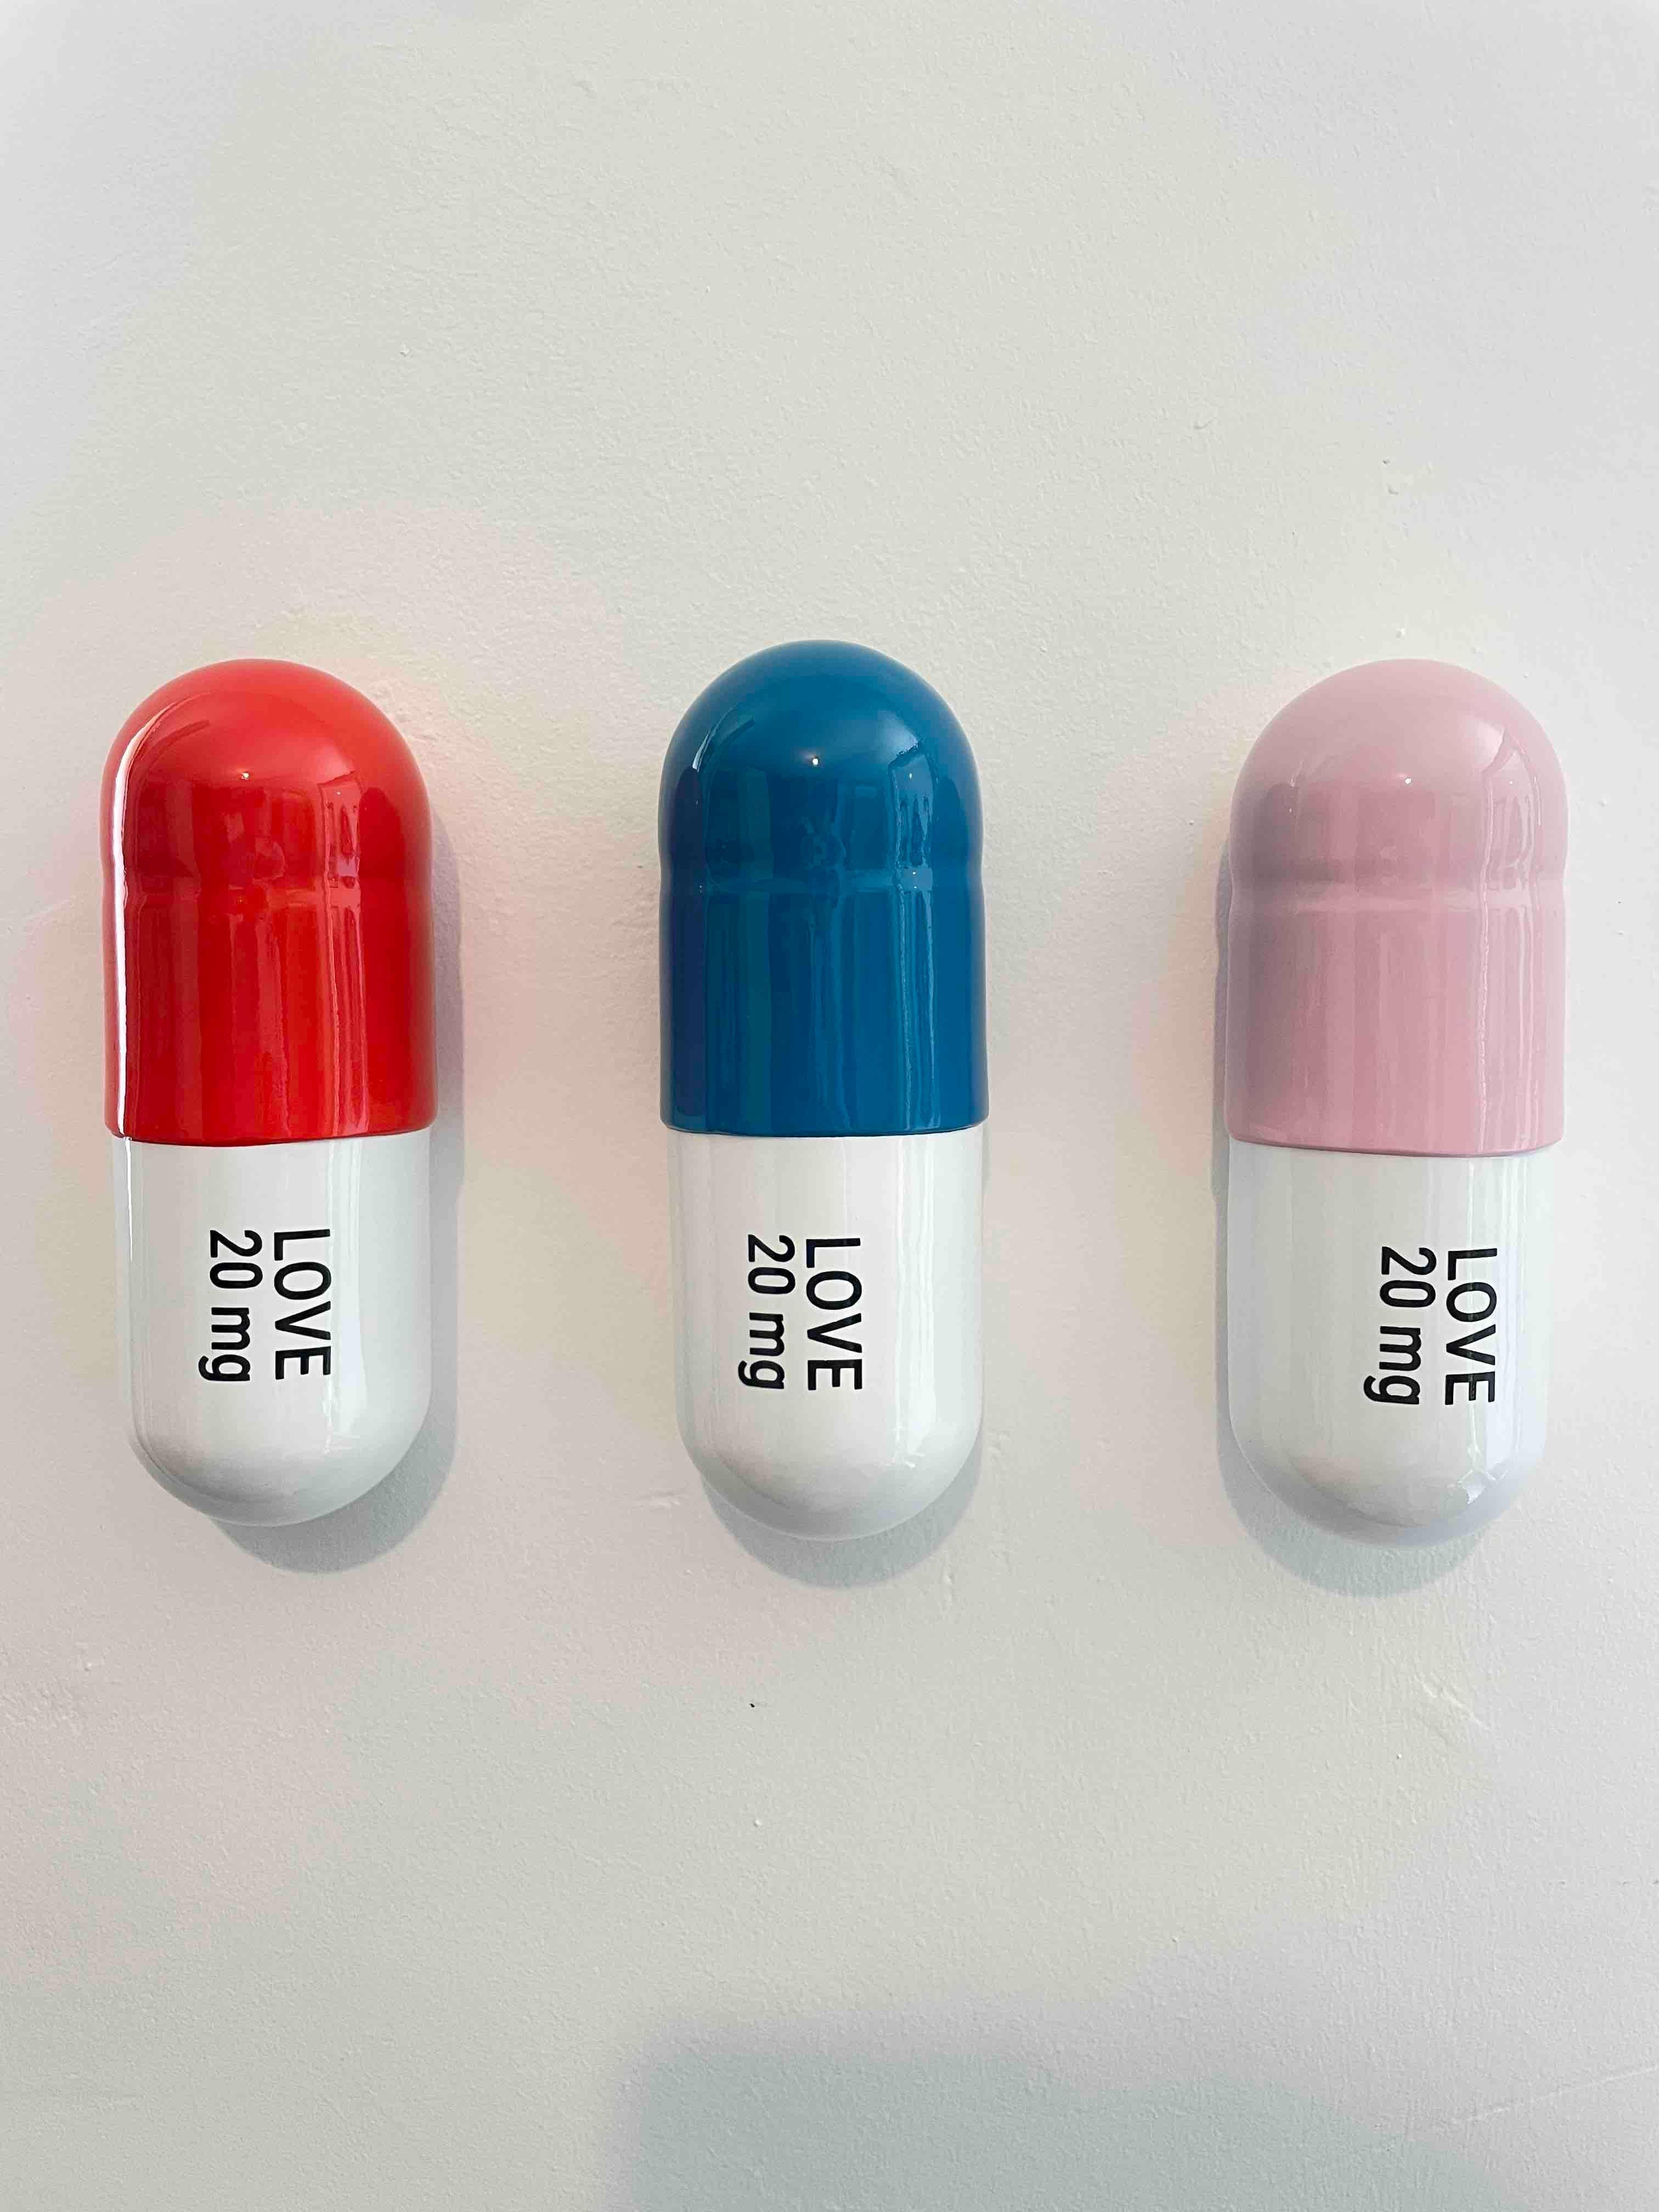 Tal Nehoray Still-Life Sculpture - 20 MG Love pill Combo (light pink, turquoise and orange) - figurative sculpture